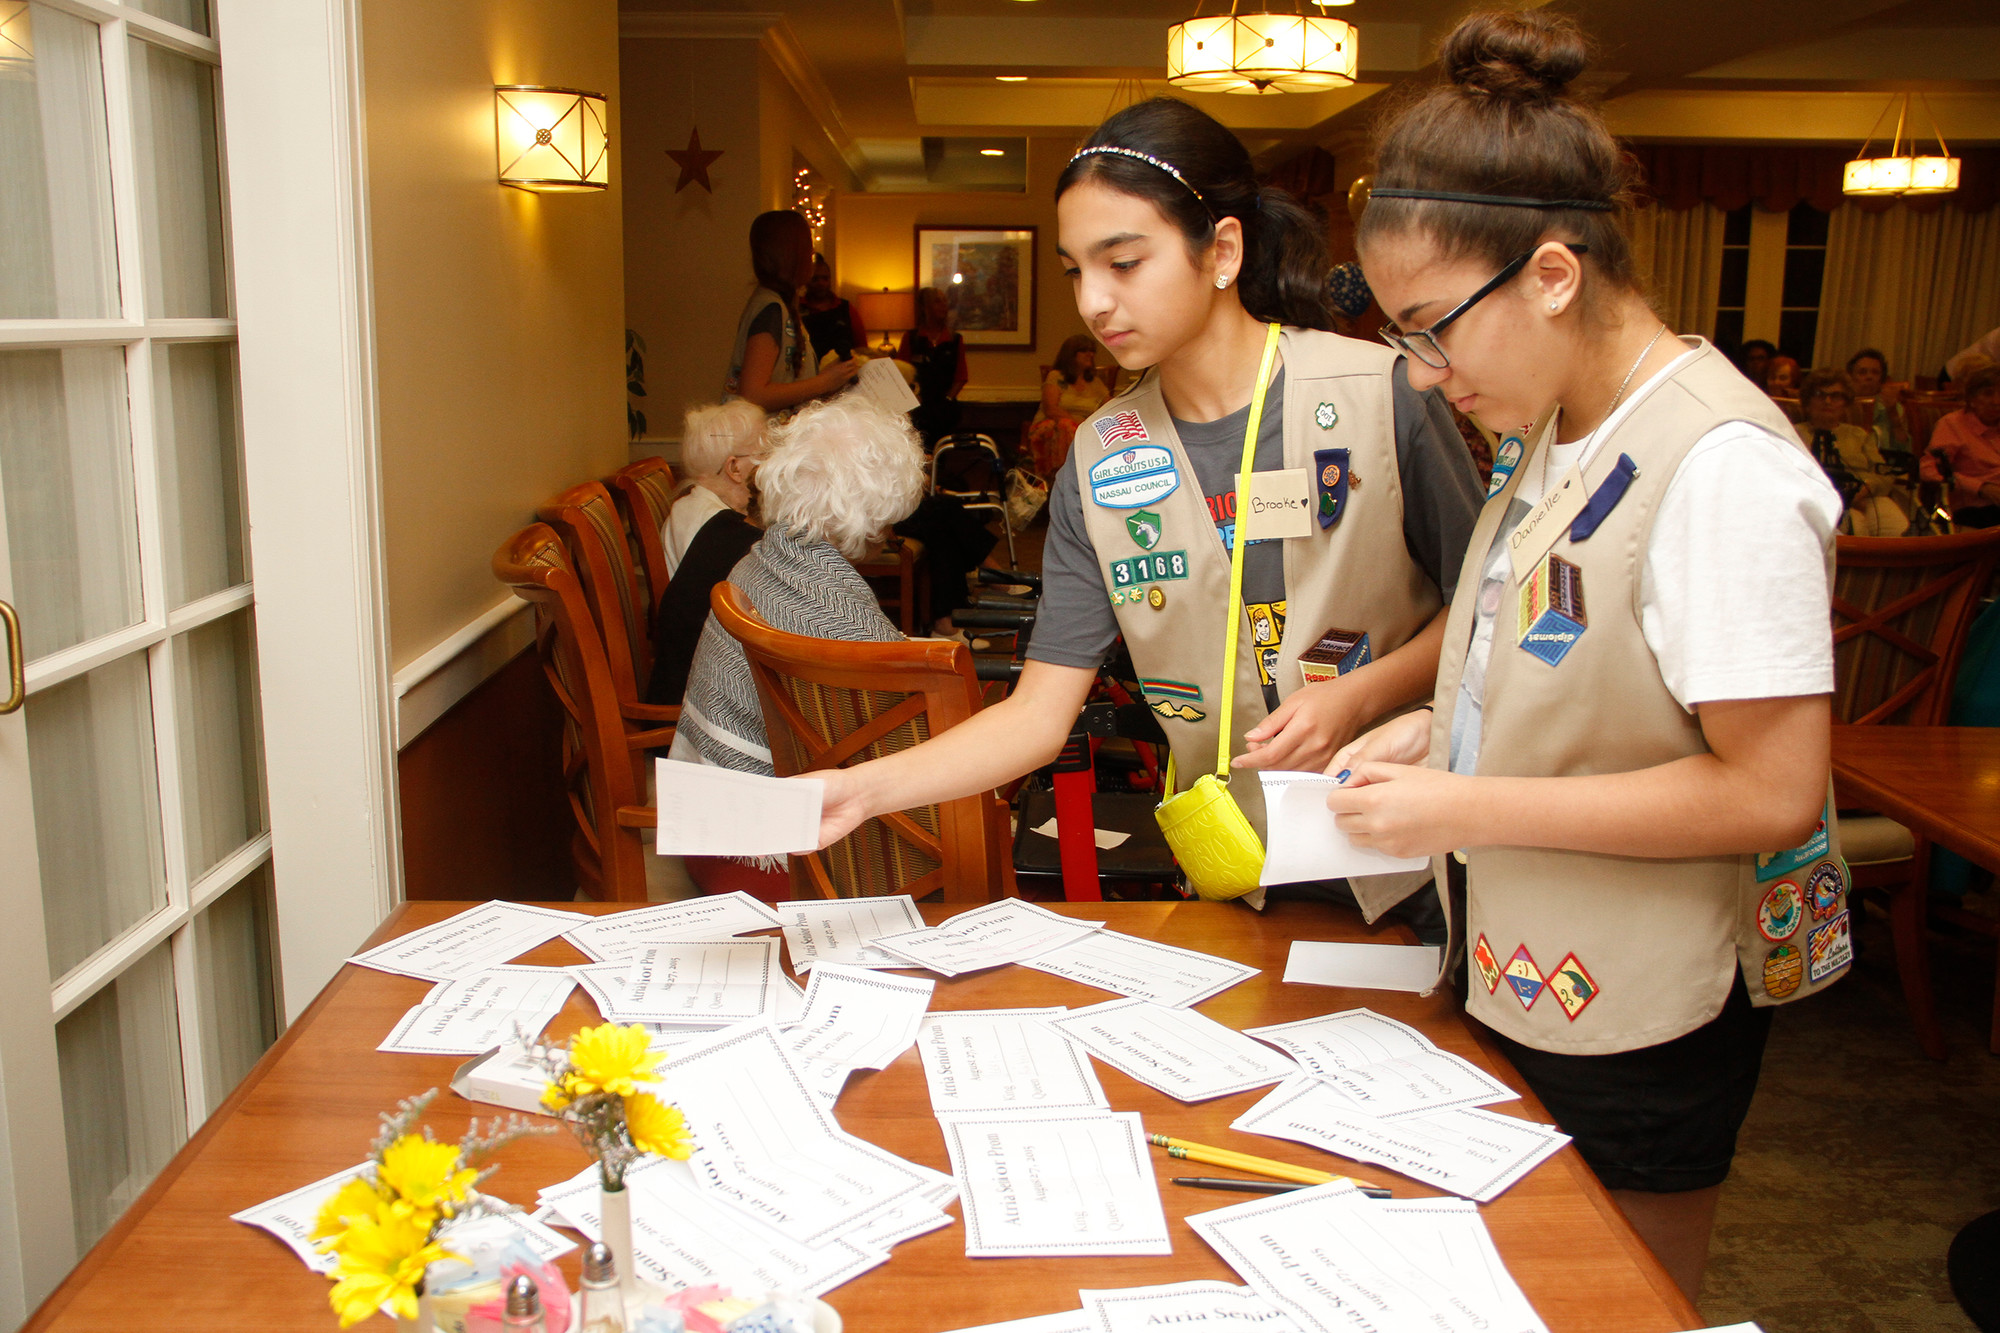 Scouts Brooke Gallo and Danielle Mascolo volunteered their time.